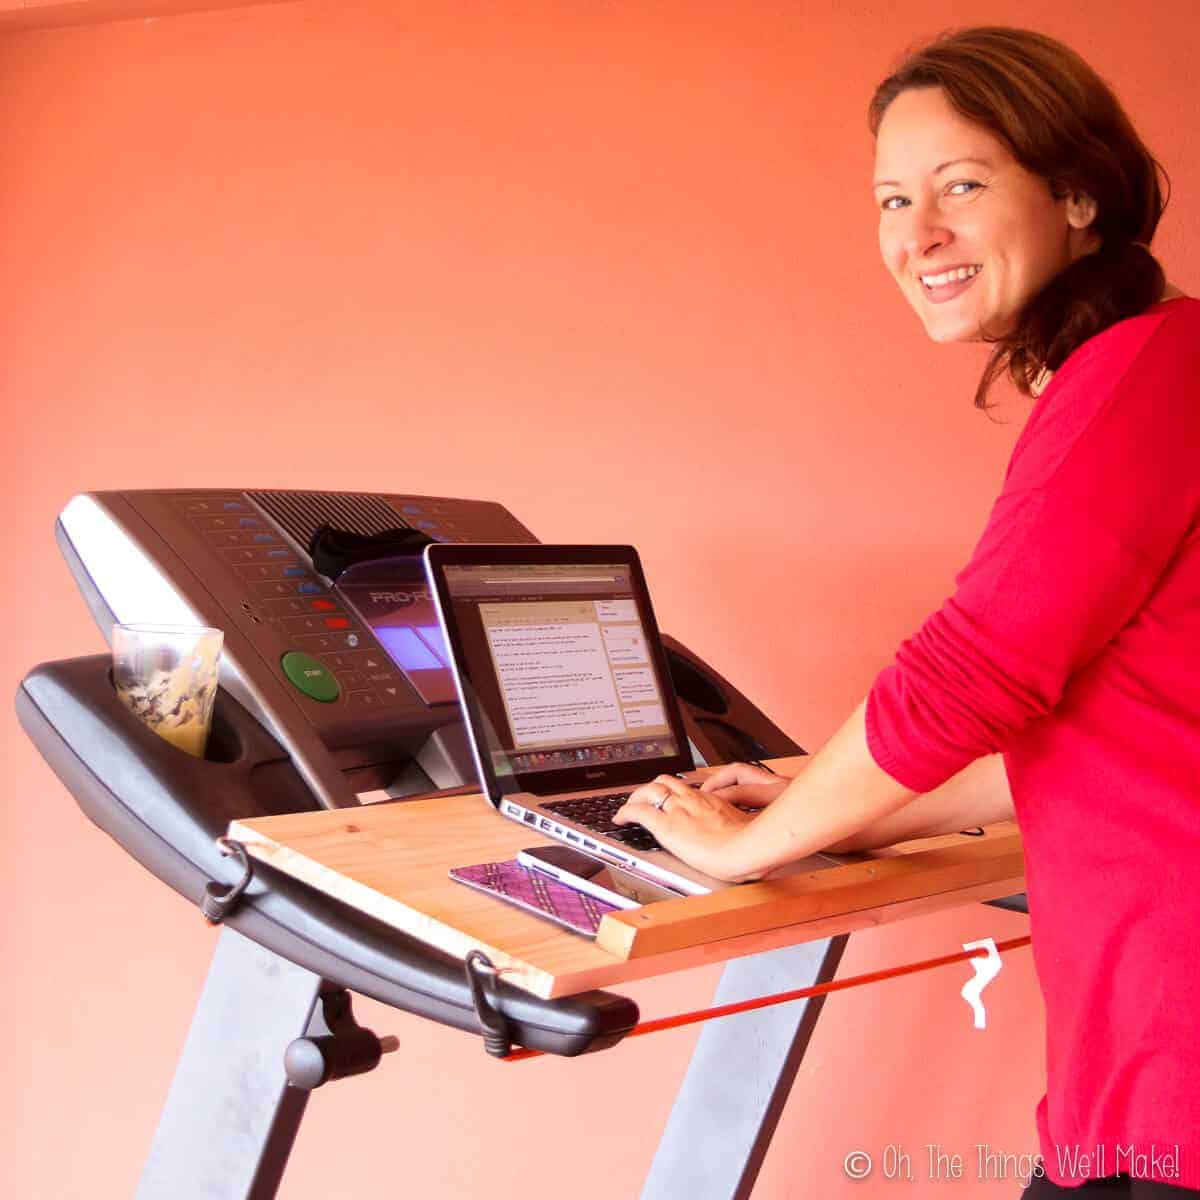 A girl on a treadmill writing on a computer on a removable desk on the treadmill